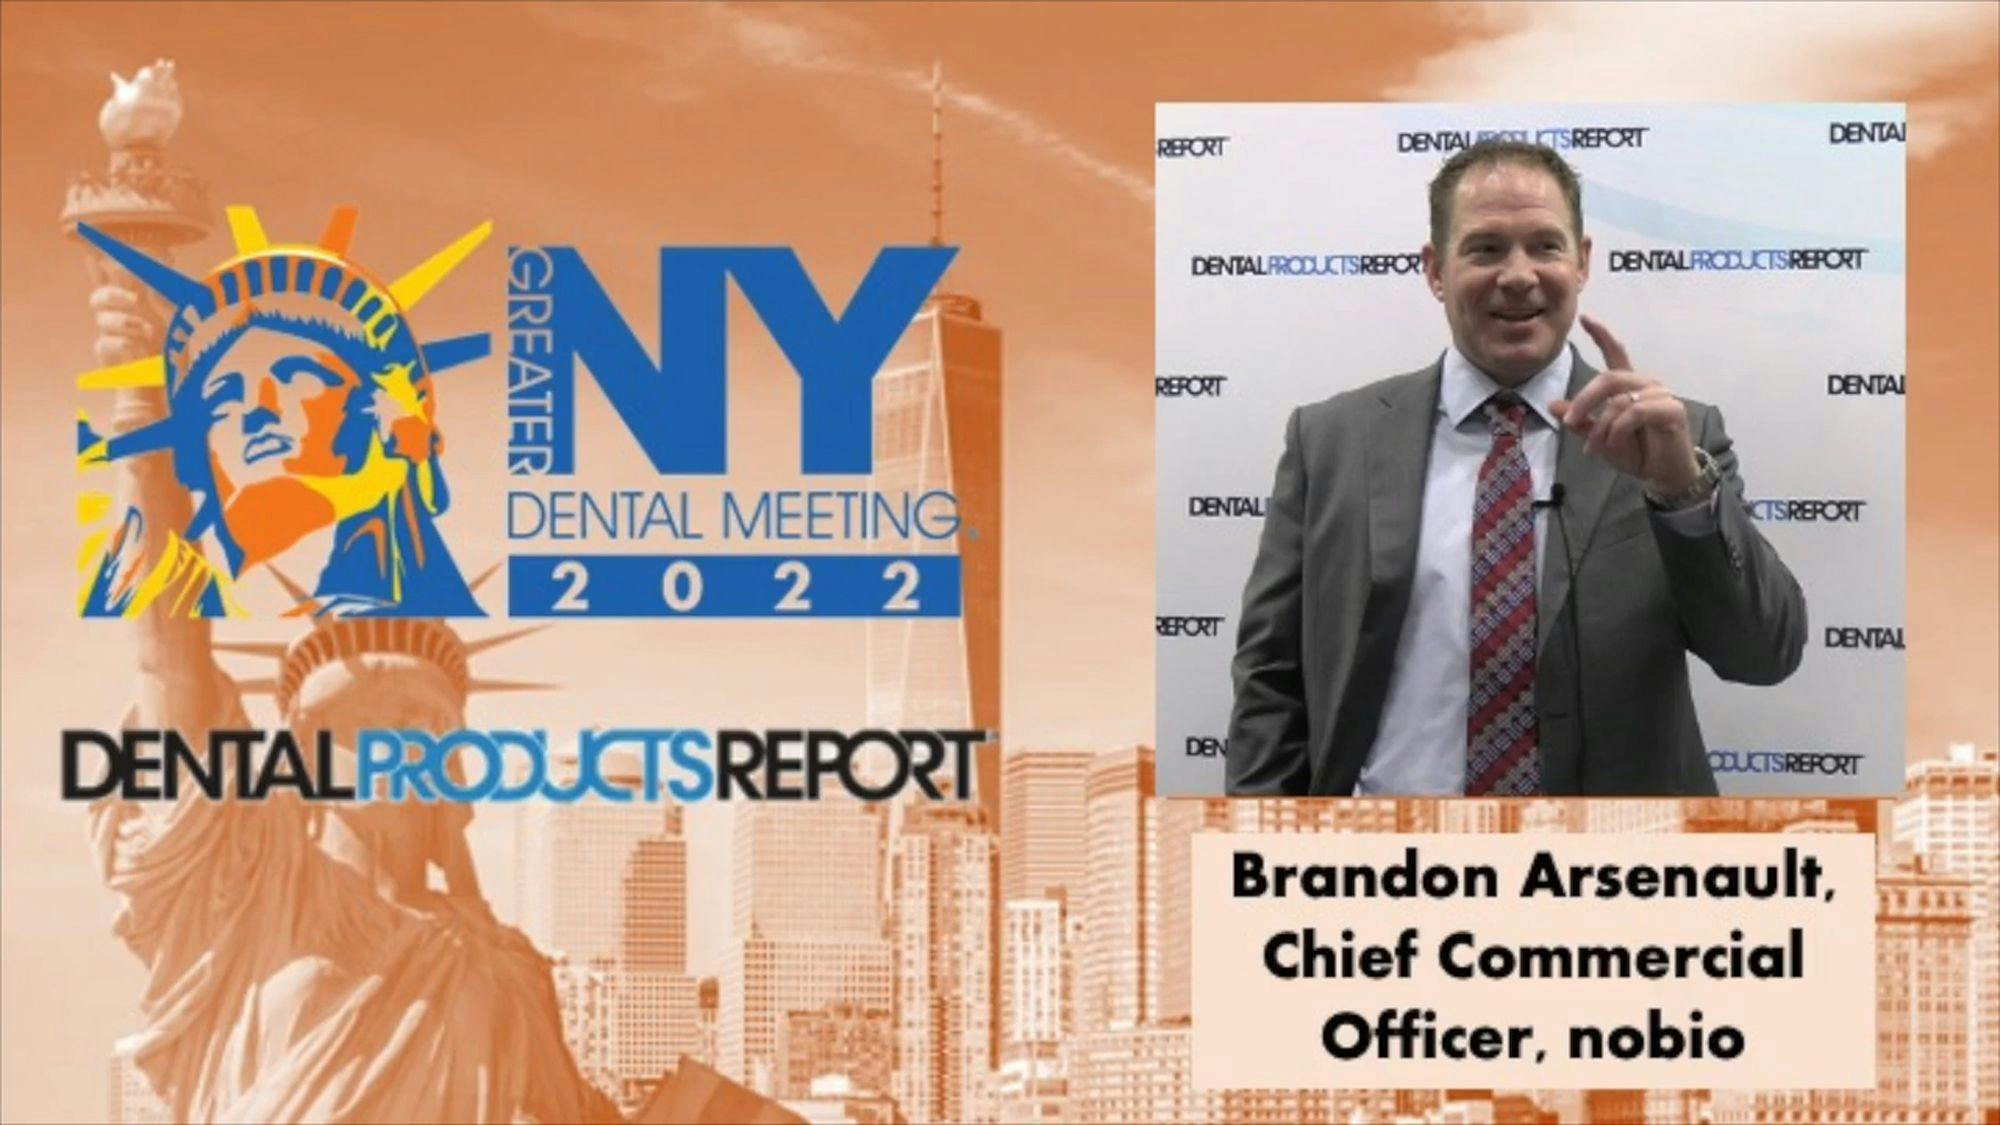 Greater New York Dental Meeting 2022: Interview with Chief Commercial Officer of Nobio Brandon Arsenault